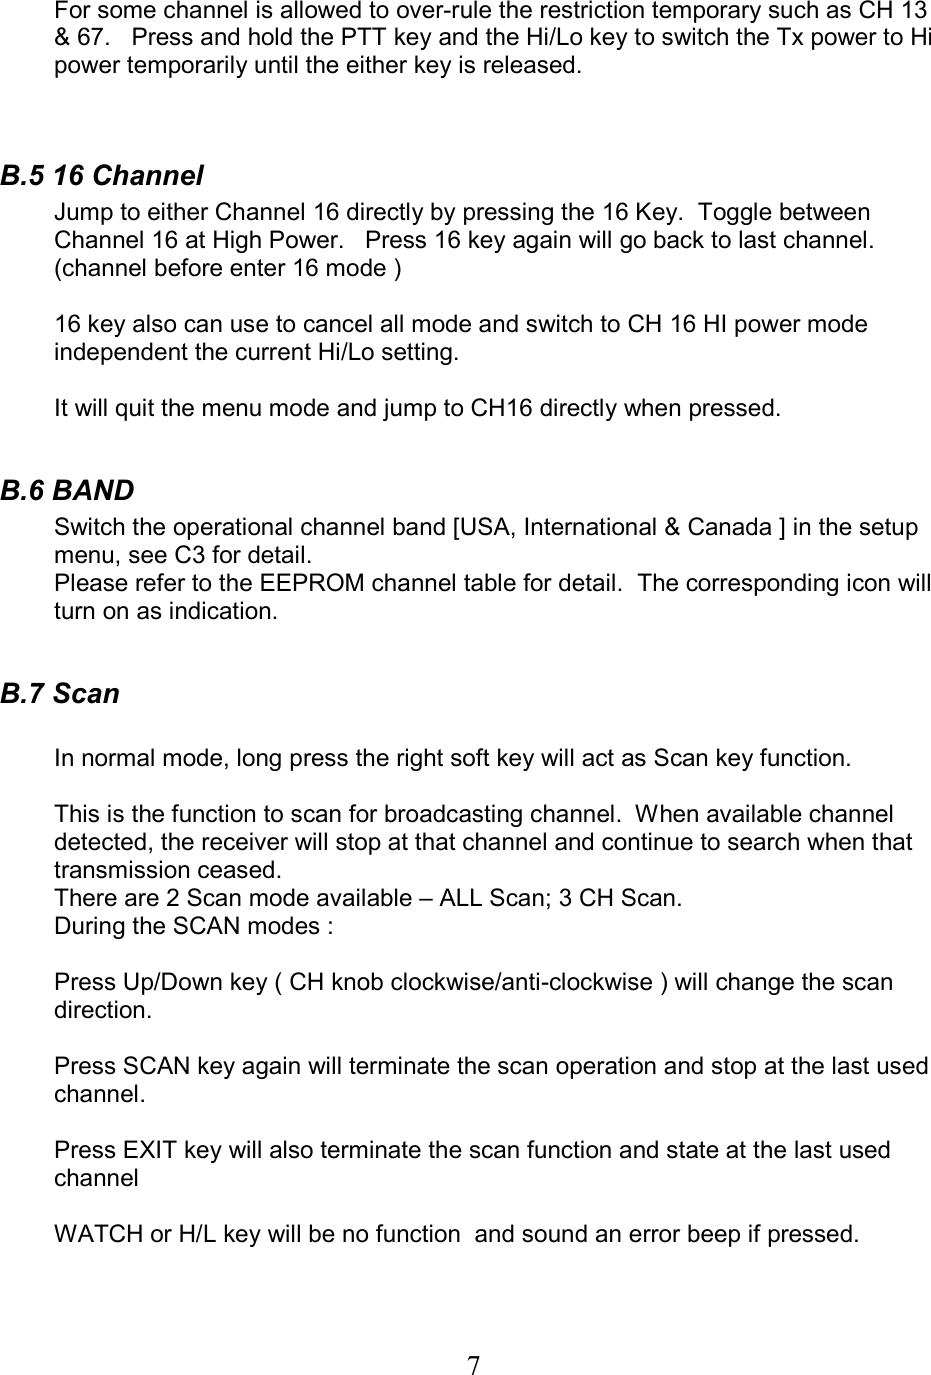 7 For some channel is allowed to over-rule the restriction temporary such as CH 13 &amp; 67.   Press and hold the PTT key and the Hi/Lo key to switch the Tx power to Hi power temporarily until the either key is released.   B.5 16 Channel Jump to either Channel 16 directly by pressing the 16 Key.  Toggle between Channel 16 at High Power.   Press 16 key again will go back to last channel. (channel before enter 16 mode )  16 key also can use to cancel all mode and switch to CH 16 HI power mode independent the current Hi/Lo setting.  It will quit the menu mode and jump to CH16 directly when pressed.  B.6 BAND Switch the operational channel band [USA, International &amp; Canada ] in the setup menu, see C3 for detail. Please refer to the EEPROM channel table for detail.  The corresponding icon will turn on as indication.    B.7 Scan  In normal mode, long press the right soft key will act as Scan key function.   This is the function to scan for broadcasting channel.  When available channel detected, the receiver will stop at that channel and continue to search when that transmission ceased. There are 2 Scan mode available – ALL Scan; 3 CH Scan.   During the SCAN modes :  Press Up/Down key ( CH knob clockwise/anti-clockwise ) will change the scan direction.  Press SCAN key again will terminate the scan operation and stop at the last used channel.  Press EXIT key will also terminate the scan function and state at the last used channel  WATCH or H/L key will be no function  and sound an error beep if pressed.    